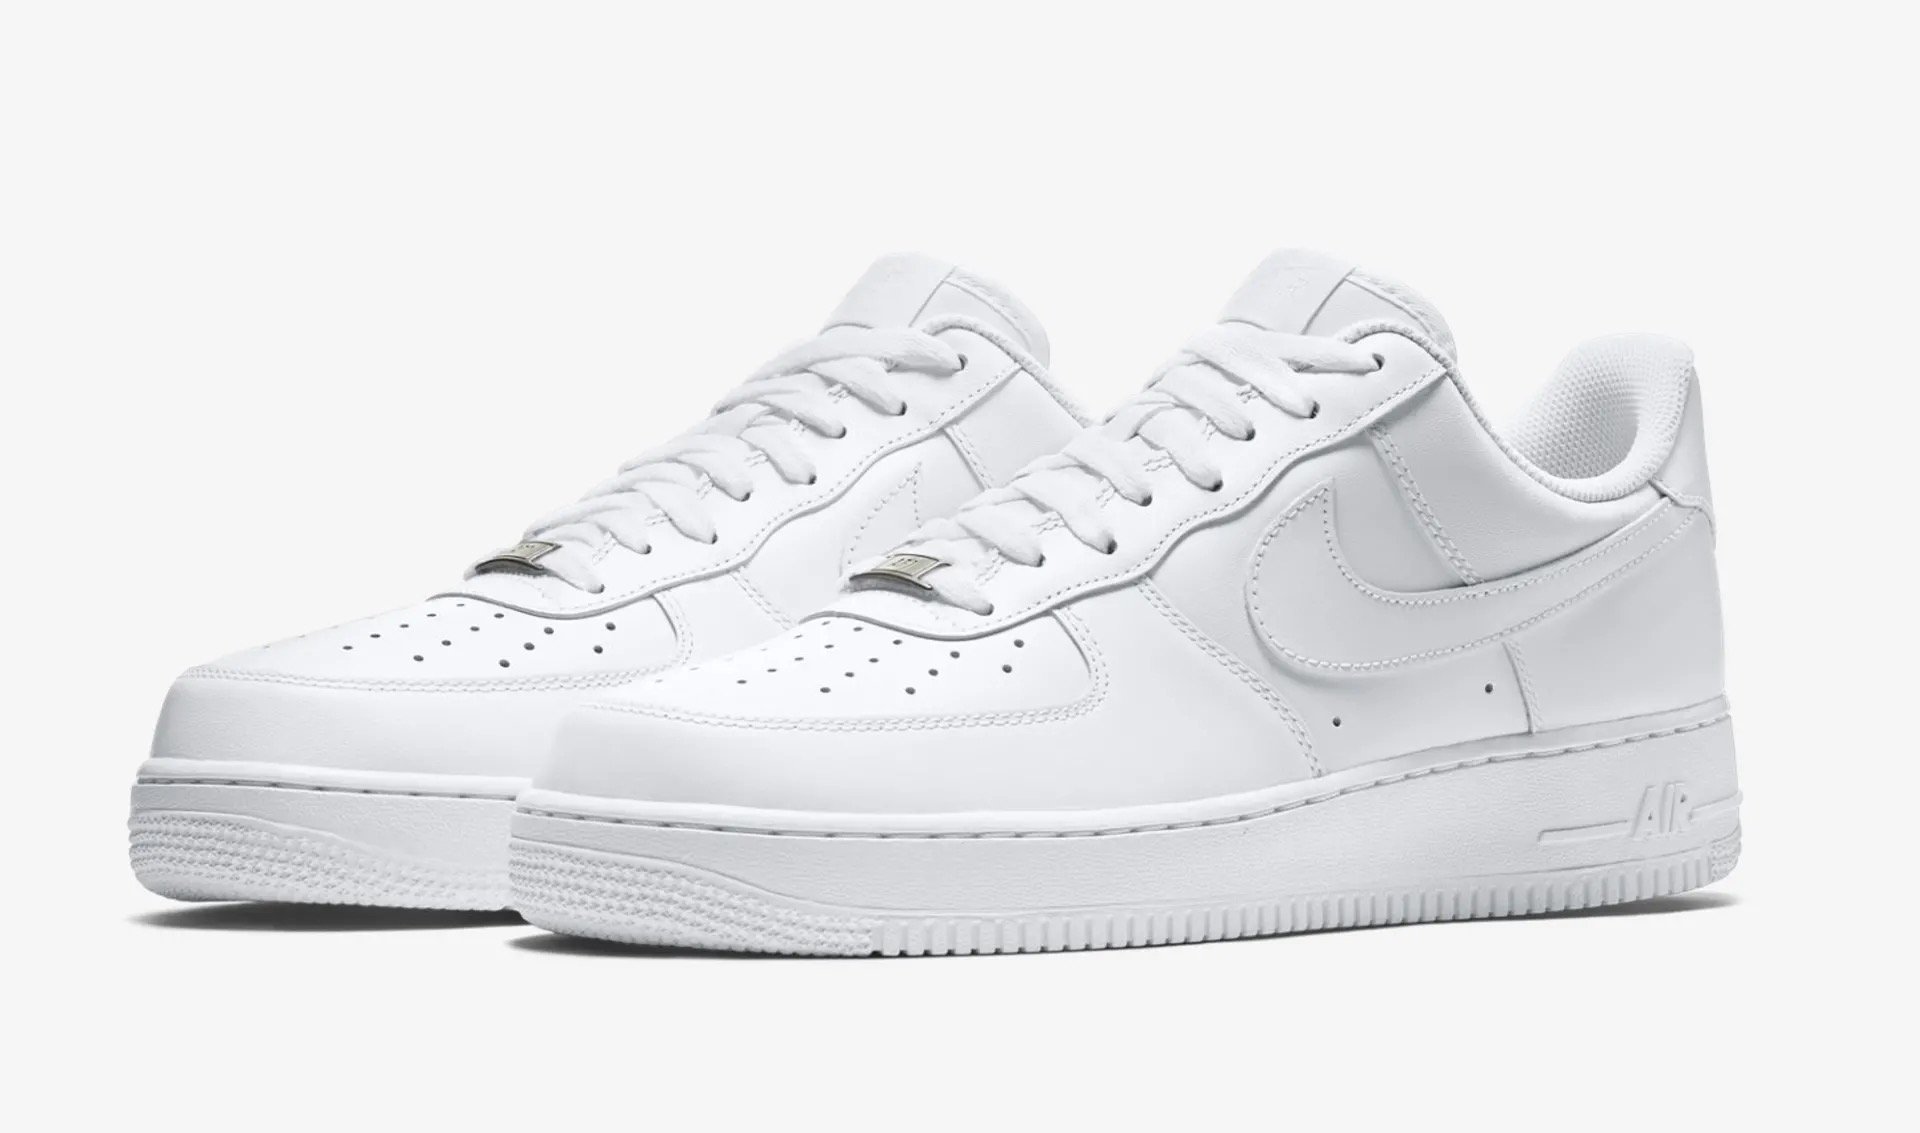 Creep klon fjols Sizing Guide: How Does The Nike Air Force 1 Fit? | The Retro Insider